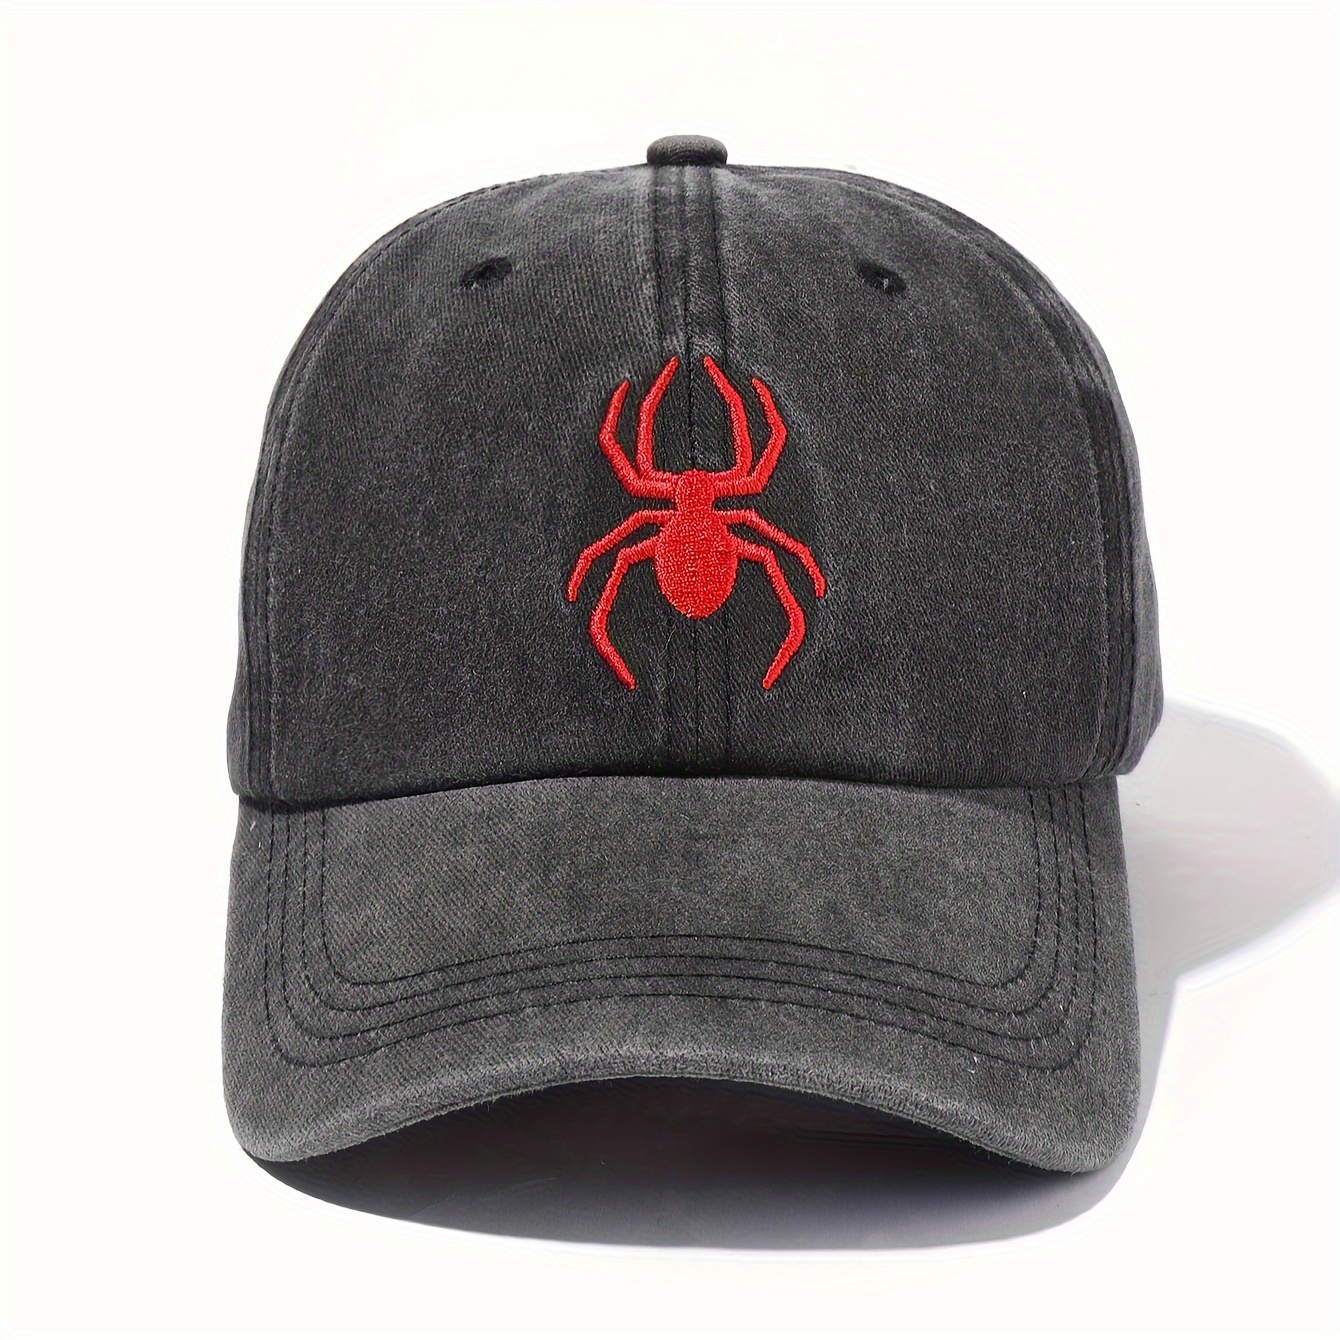 

1pc Vintage Washed Spider Embroidered Baseball Cap, Adjustable Casual Outdoor Vacation Peaked Hat, Unisex Cotton Comfort Fit Sport Cap Suitable For Halloween Party